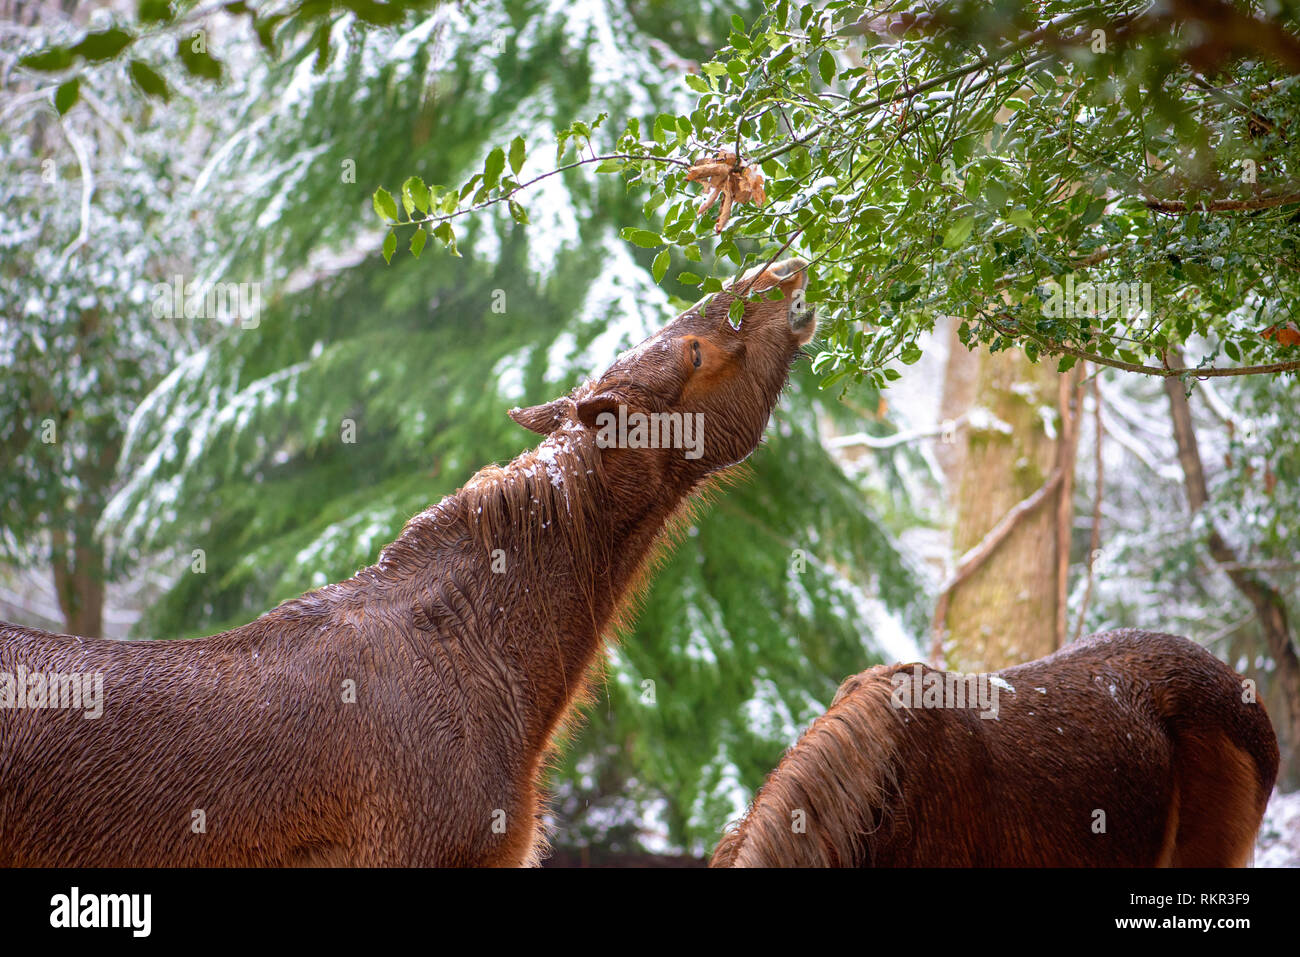 Close-up image of New Forest Ponies grazing on Holly and Bracken in the snow, in the woodlands of the New Forest National Park, Hampshire, England, UK Stock Photo